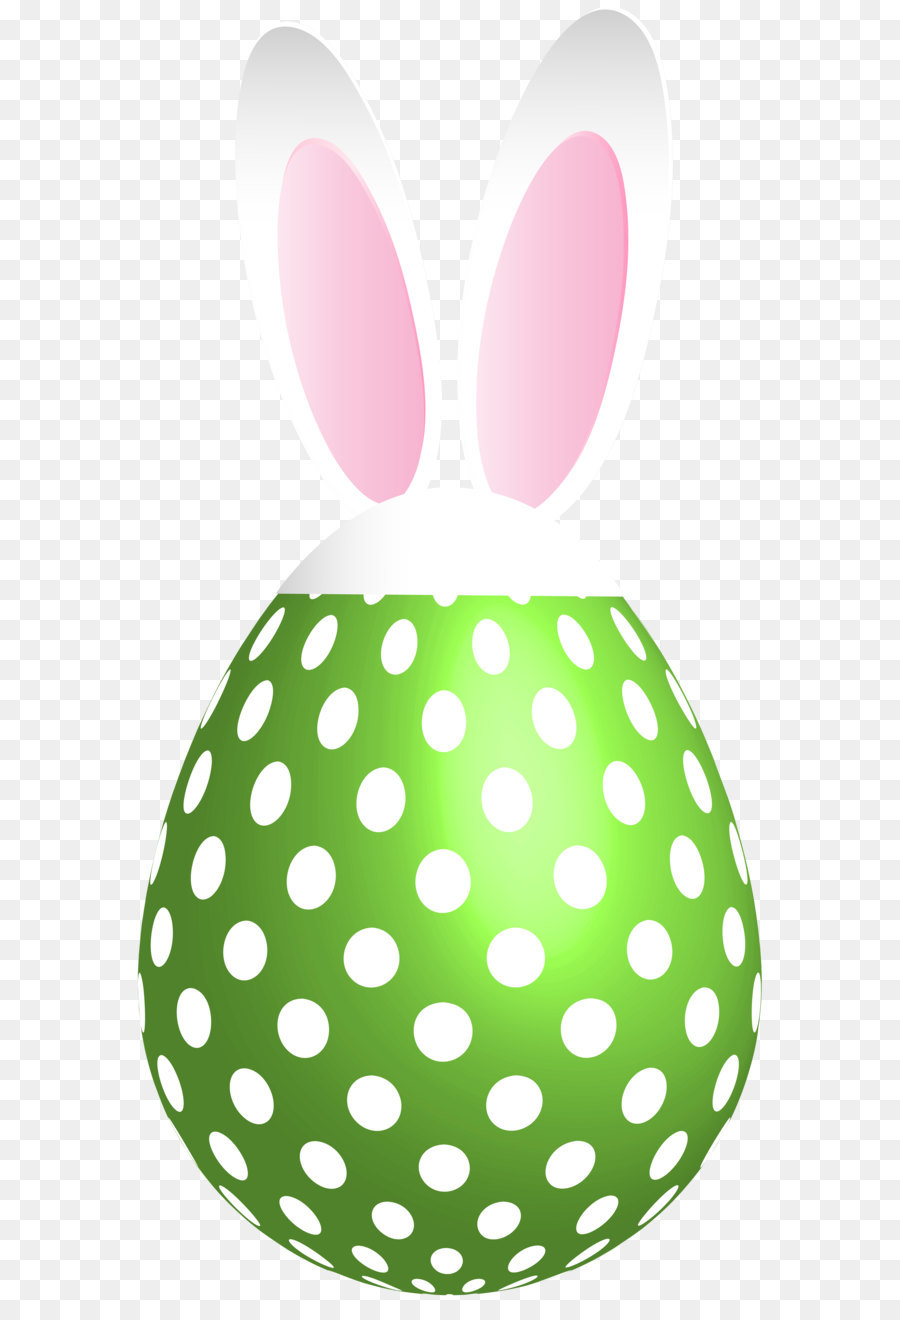 Image file formats Lossless compression - Easter Dotted Bunny Egg Green Transparent PNG Clip Art png download - 3992*8000 - Free Transparent Easter Bunny png Download.